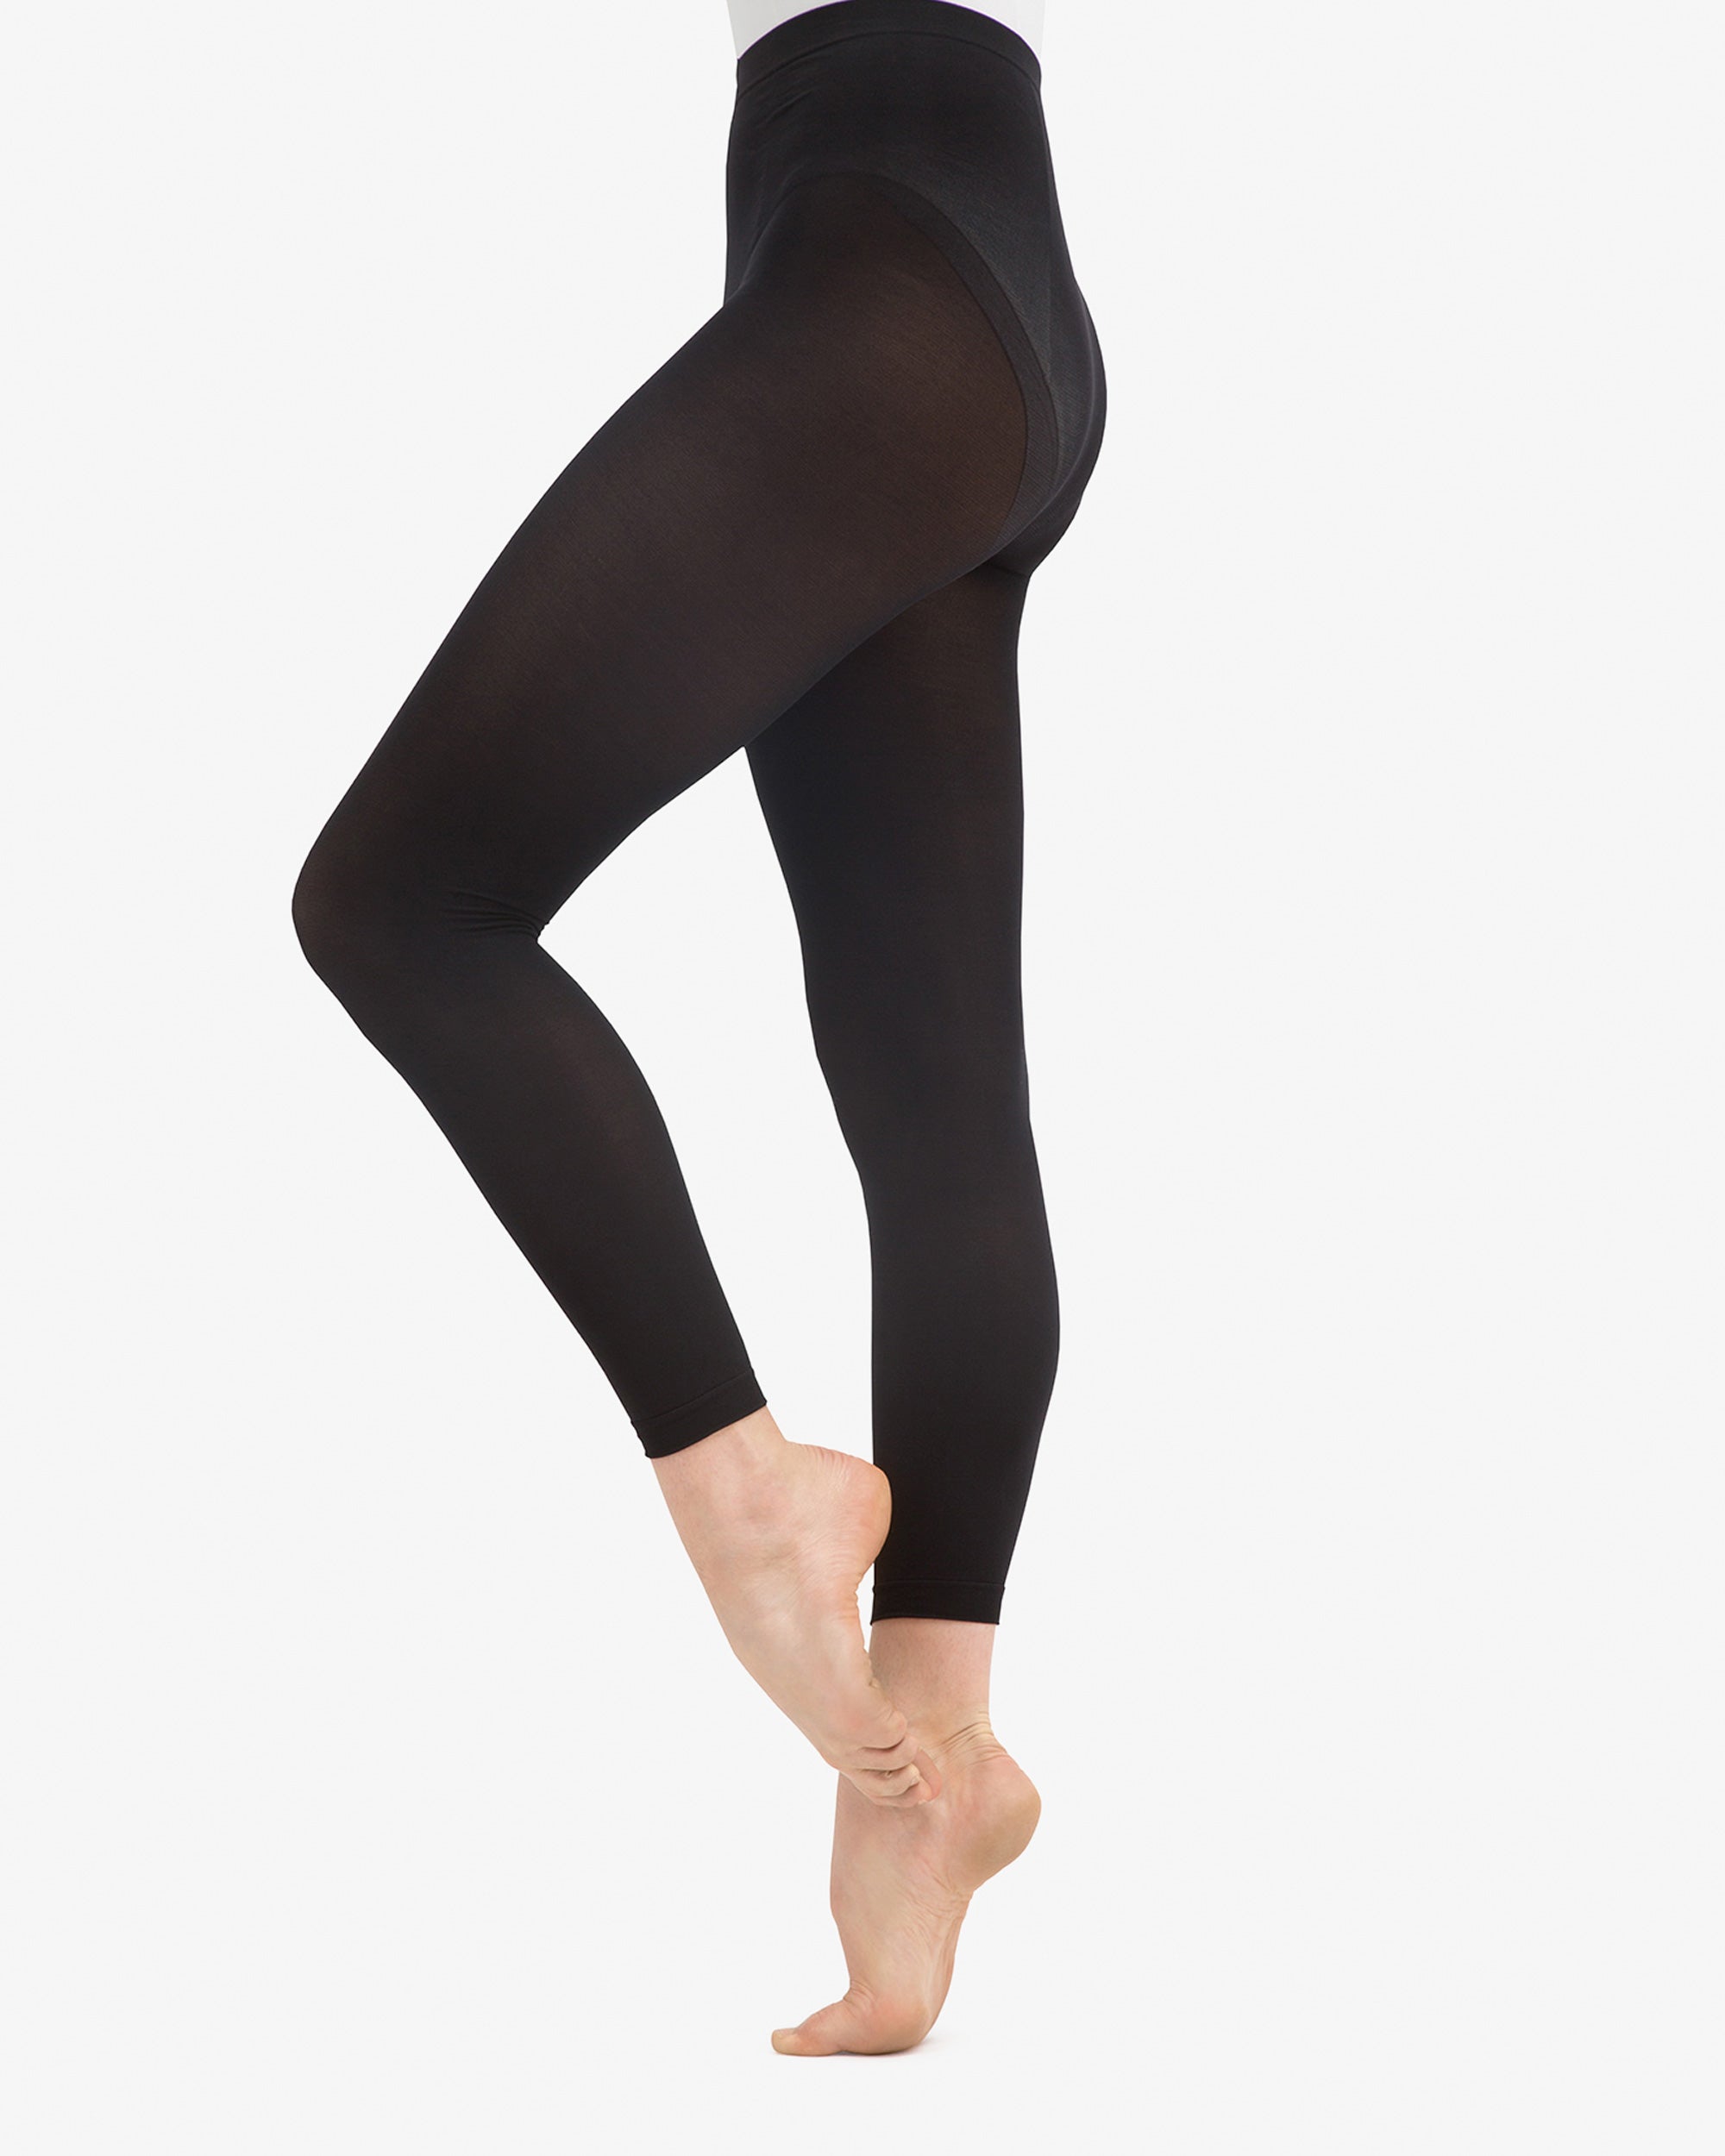 Opaque footless tights